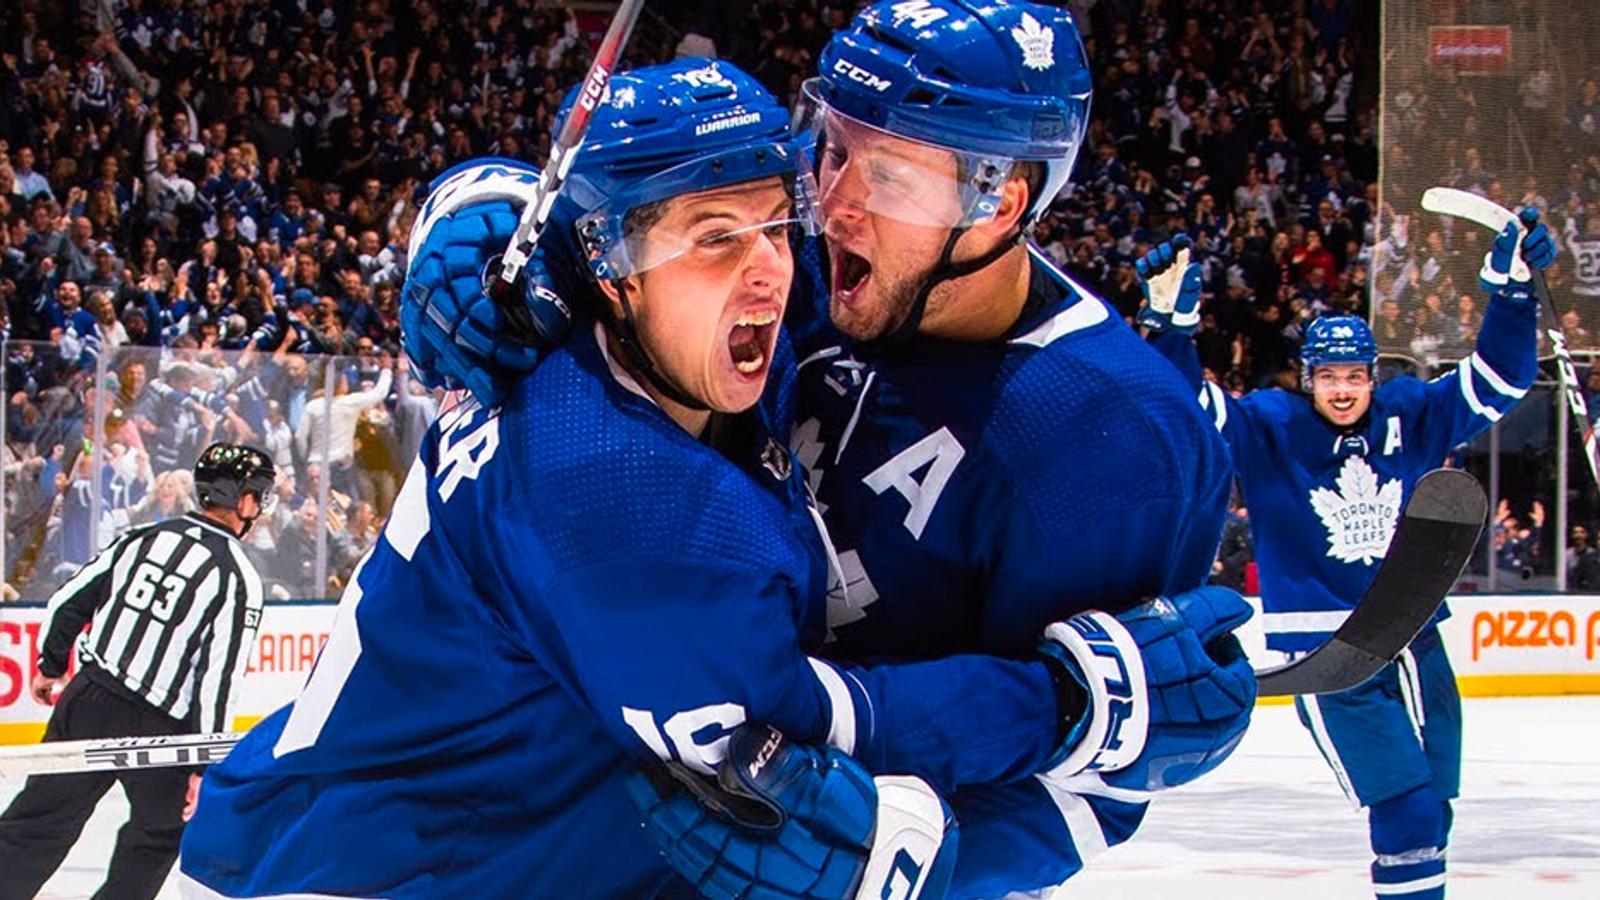 Report: Leafs' cap crunch will force more star players to leave